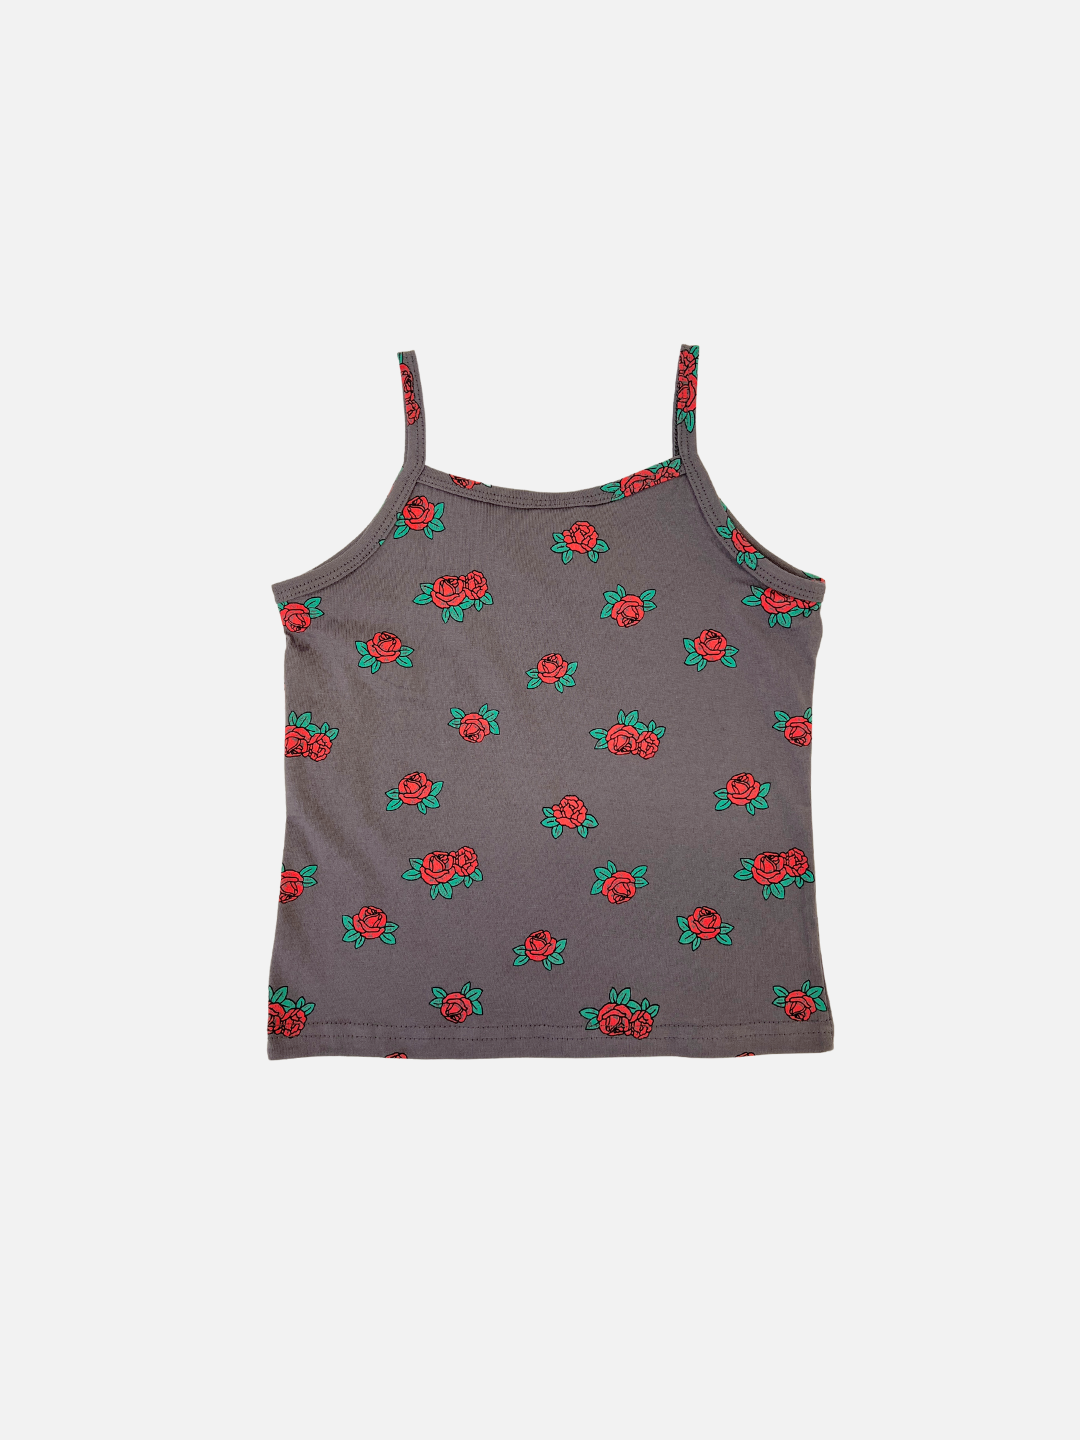 Charcoal | Back view of the kid's roses tank top in Charcoal with red roses all-over print